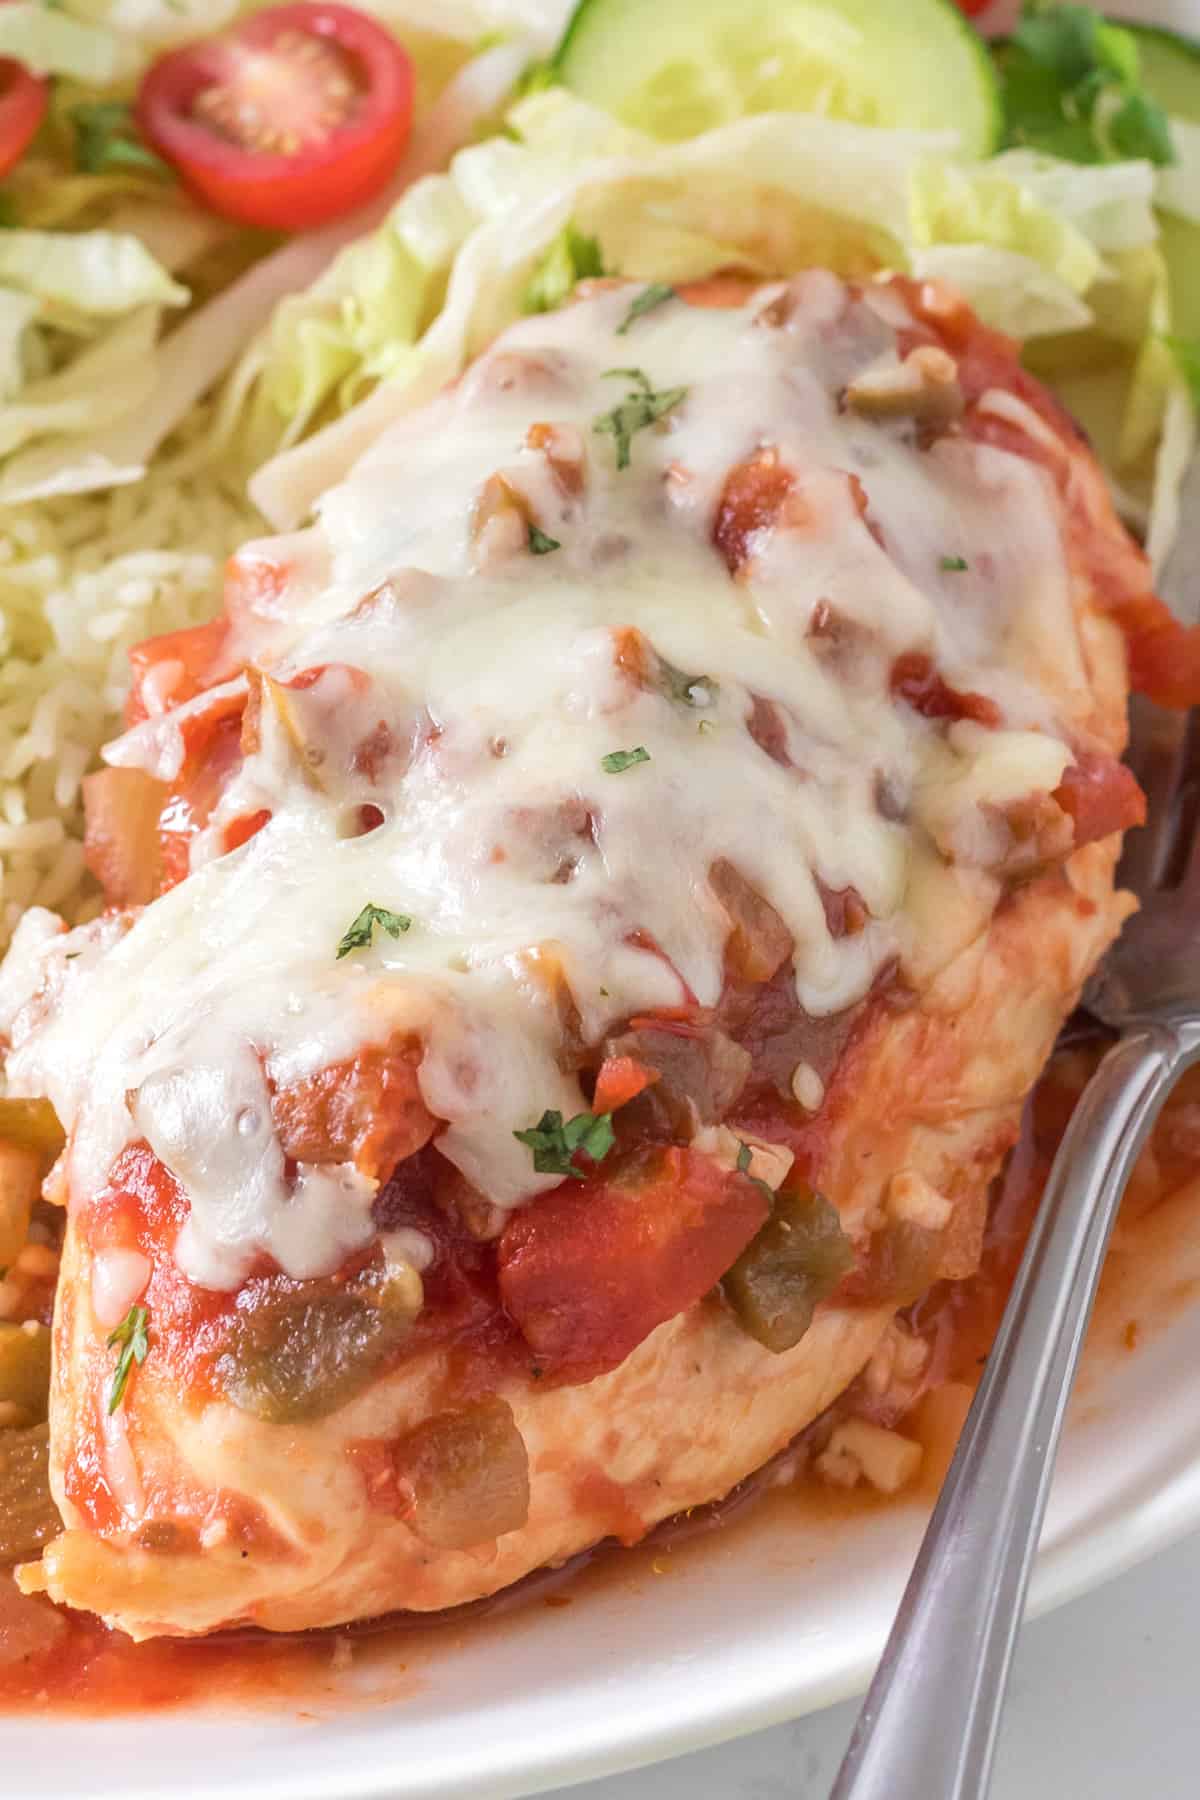 Chicken breast cooked with salsa and melted cheese on top.